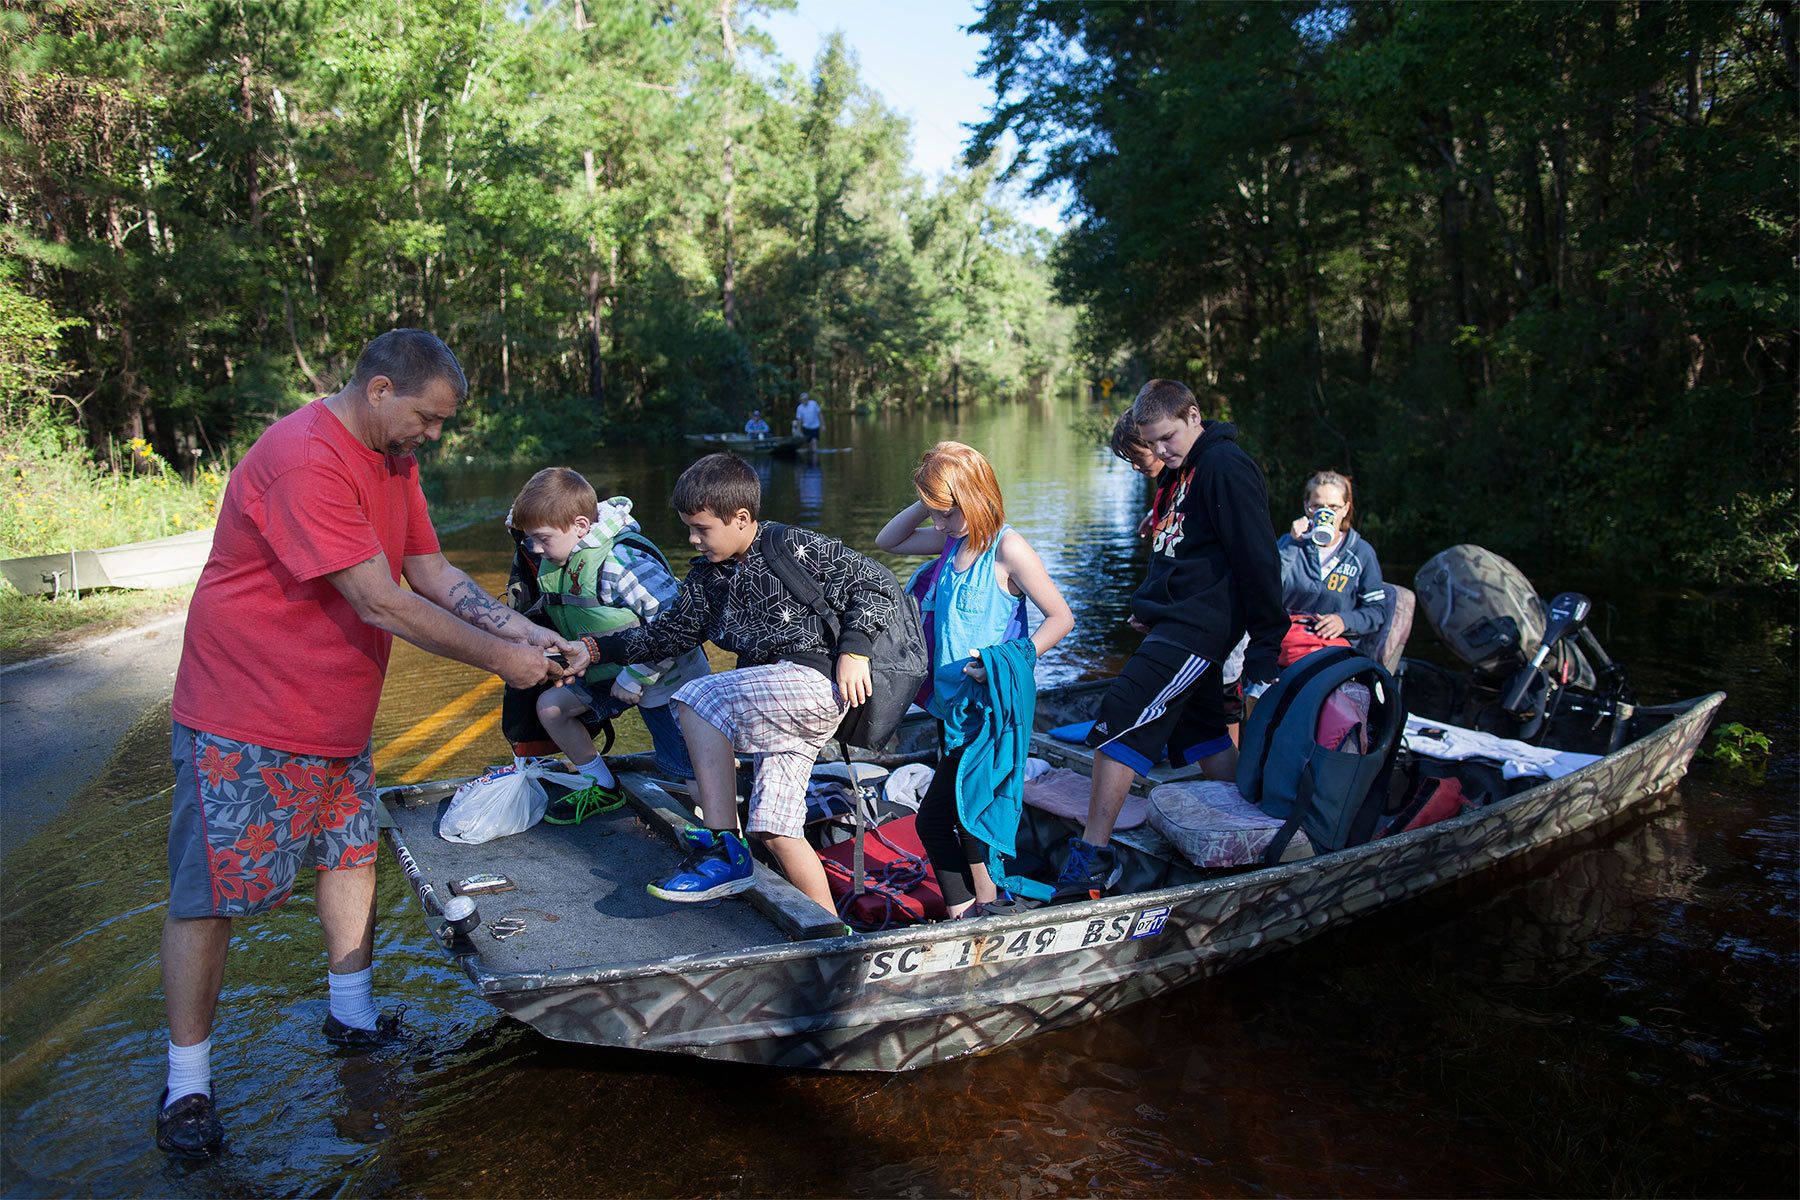 Scott Everett (L) helps his grandchildren enroute to school off a johnboat along Lee's Landing Circle in Conway, South Carolina October 7, 2015. The family has been living in their home surrounded by flood waters since Sunday evening. Scott Everett (L) helps his grandchildren enroute to school off a johnboat along Lee's Landing Circle in Conway, South Carolina October 7, 2015. The family has been living in their home surrounded by flood waters since Sunday evening. Rescuers searched early Wednesday for two people missing in floodwaters in South Carolina, while authorities urged residents in hundreds of homes to seek higher ground. REUTERS/Randall Hill